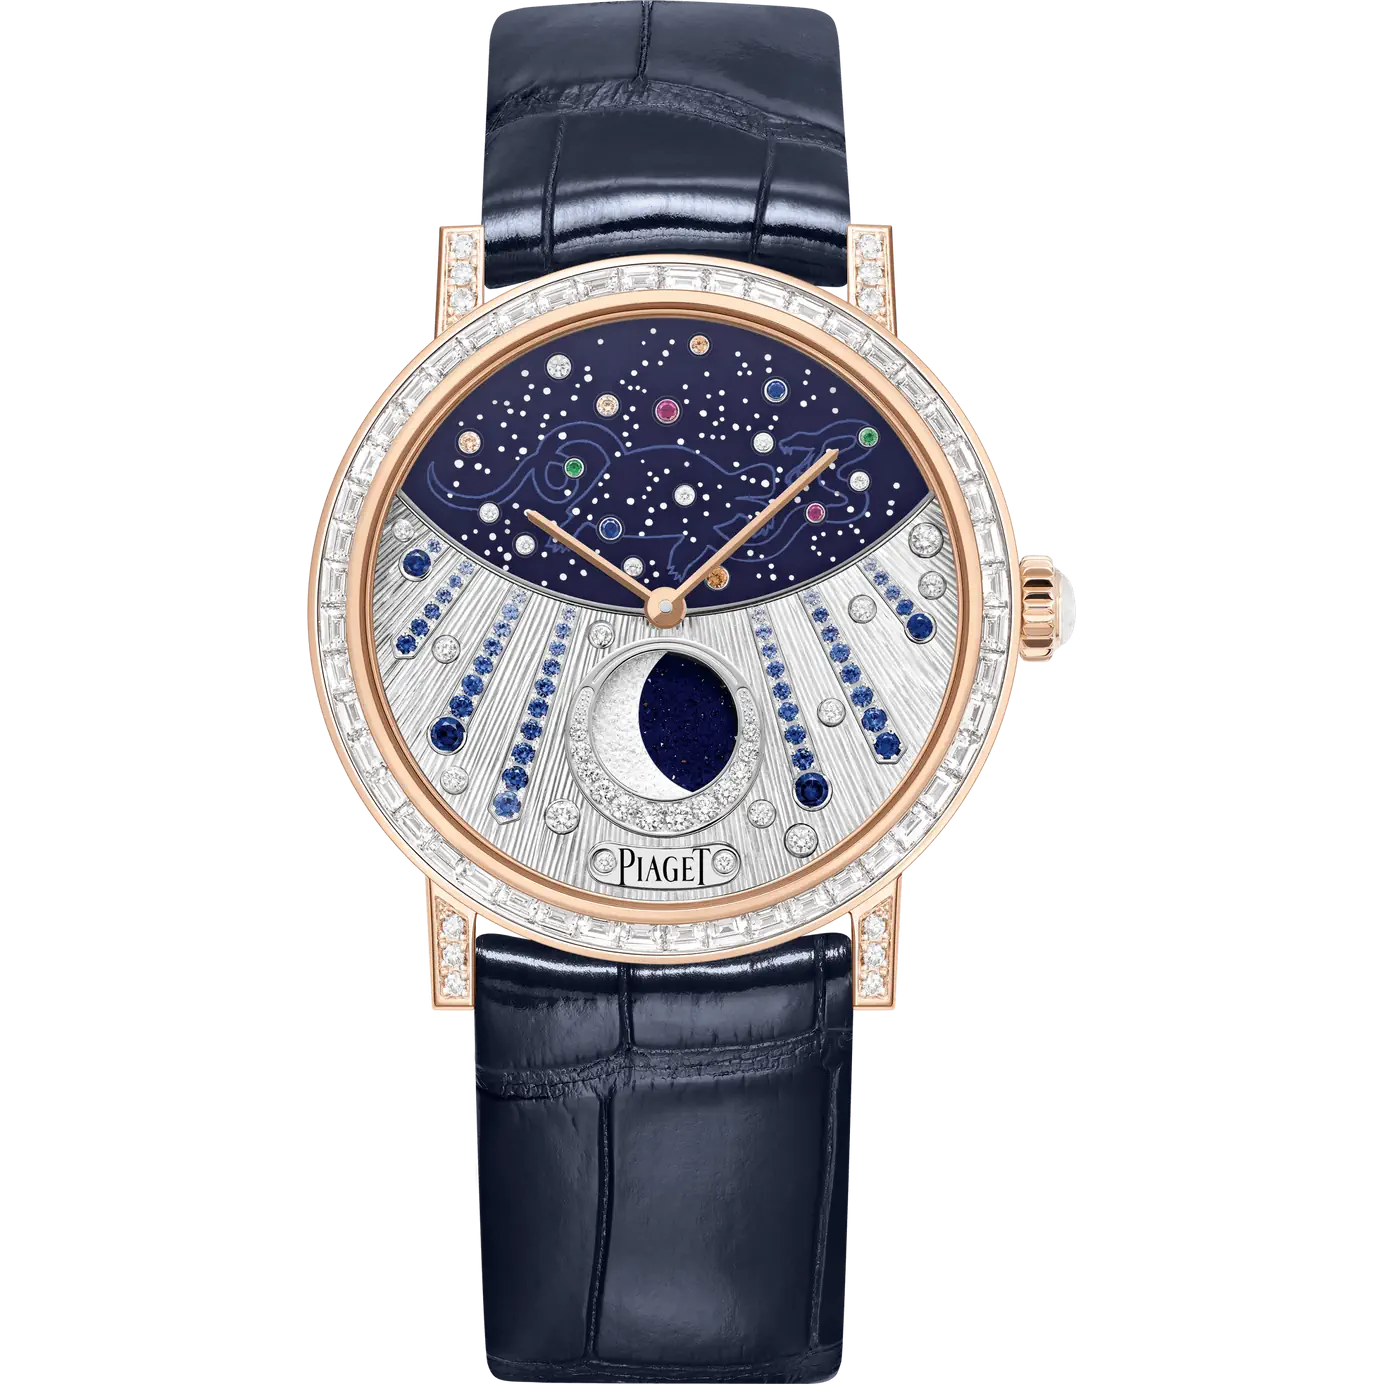 Piaget Altiplano Moonphase High Jewelry